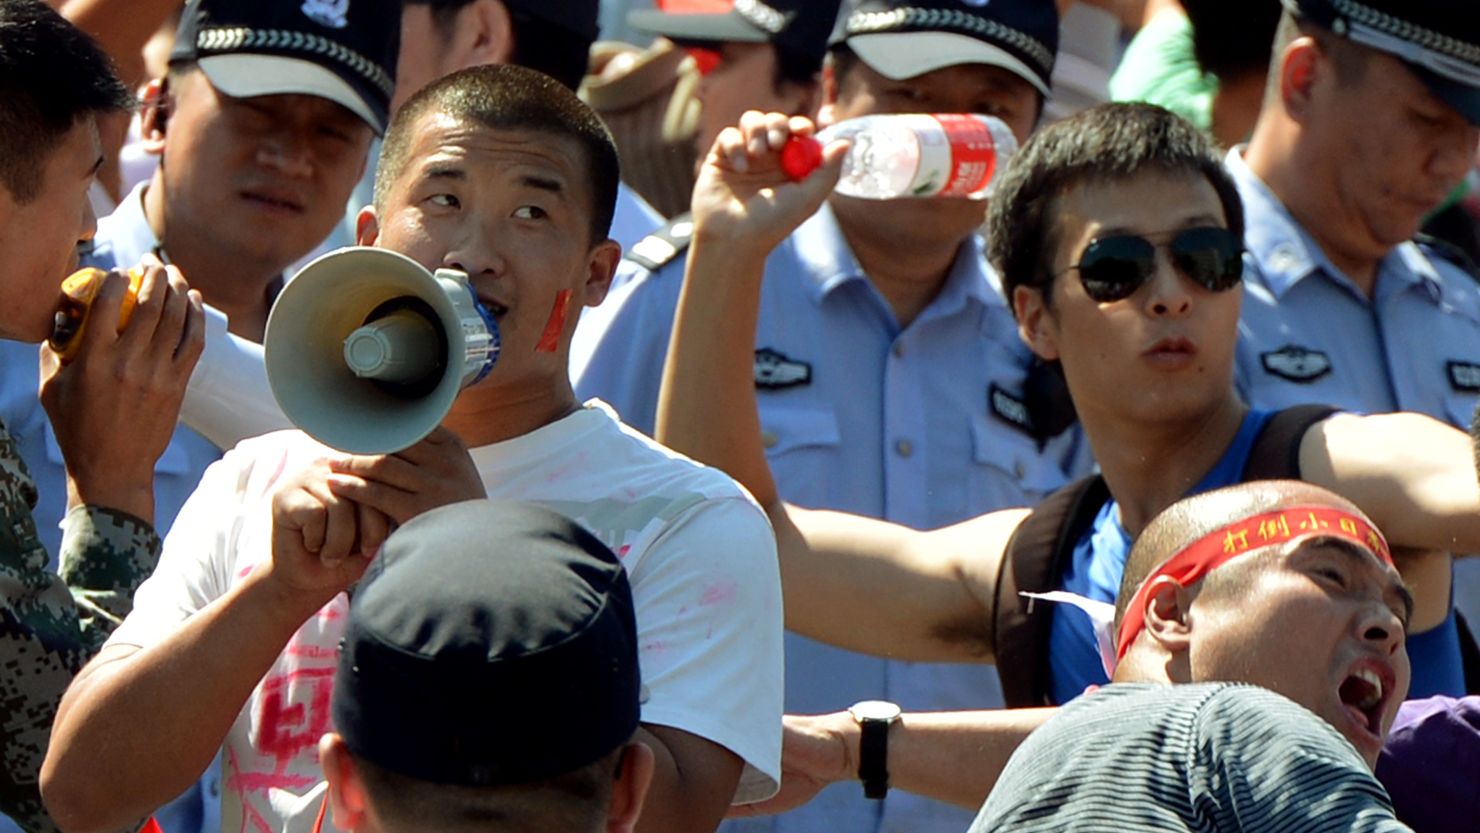 Chinese protesters throw bottles in an anti-Japan rally outside the Japanese embassy on Tuesday in Beijing.
